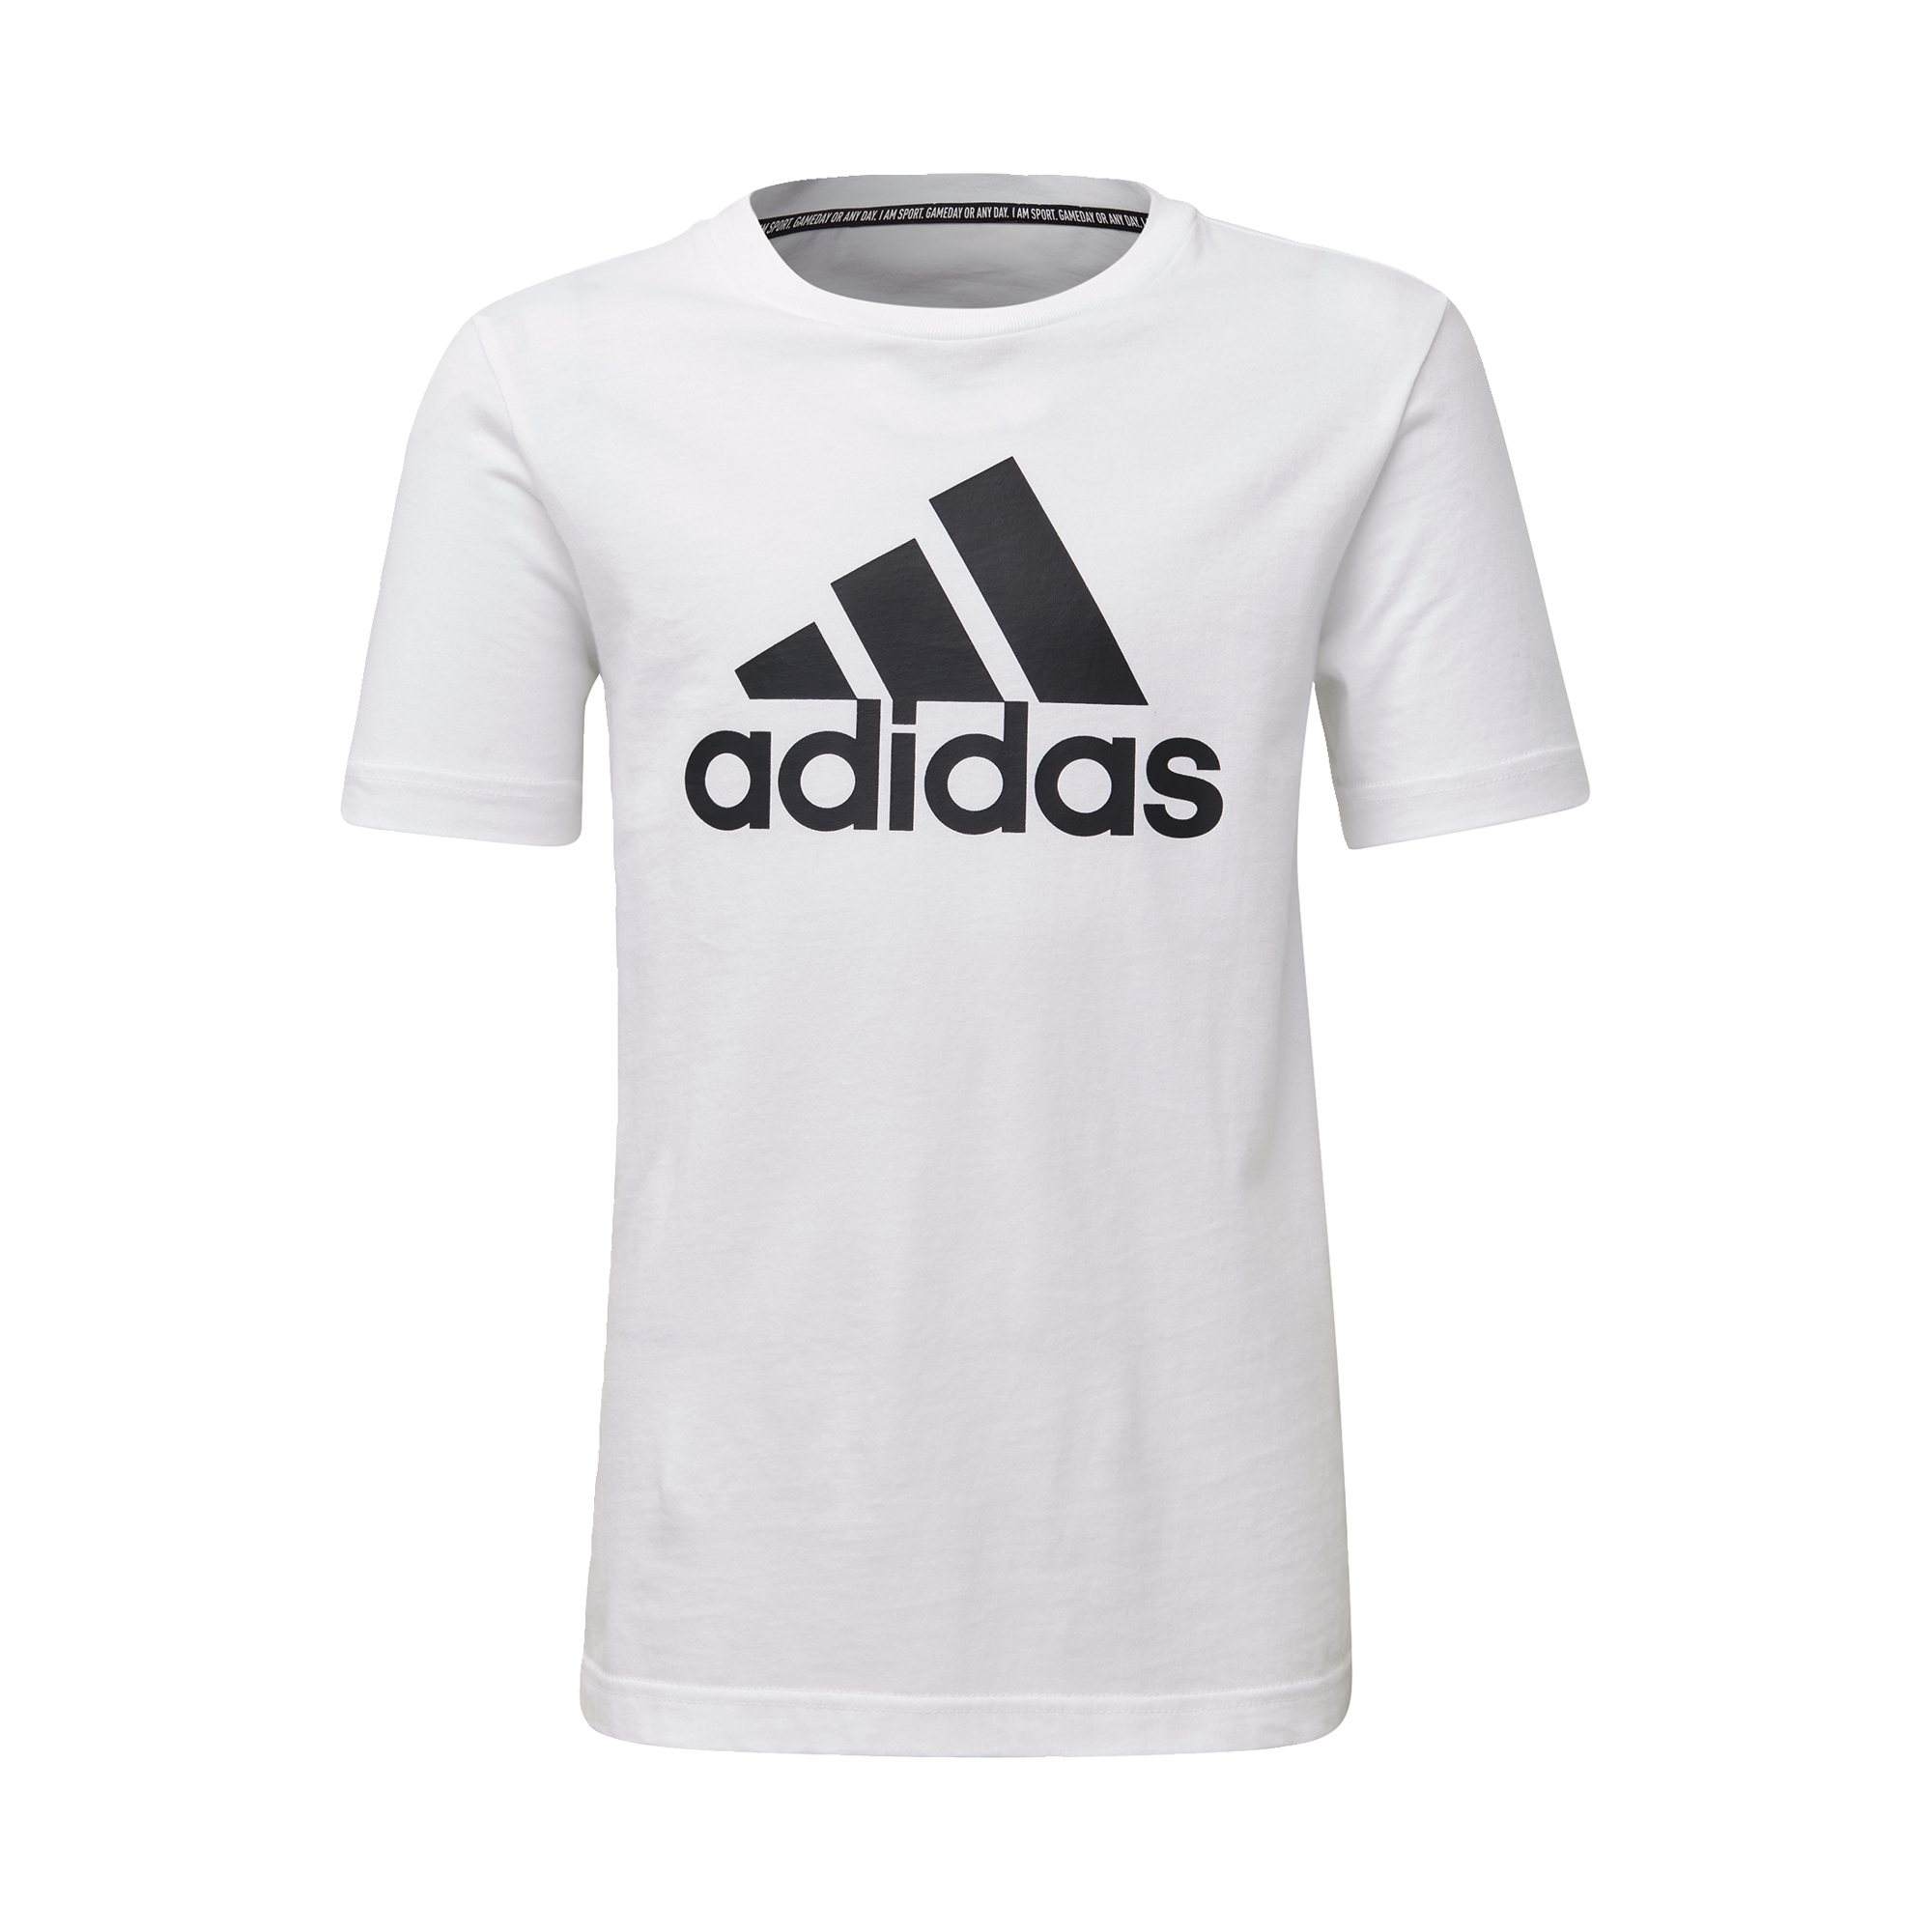 adidas t shirts for mens online